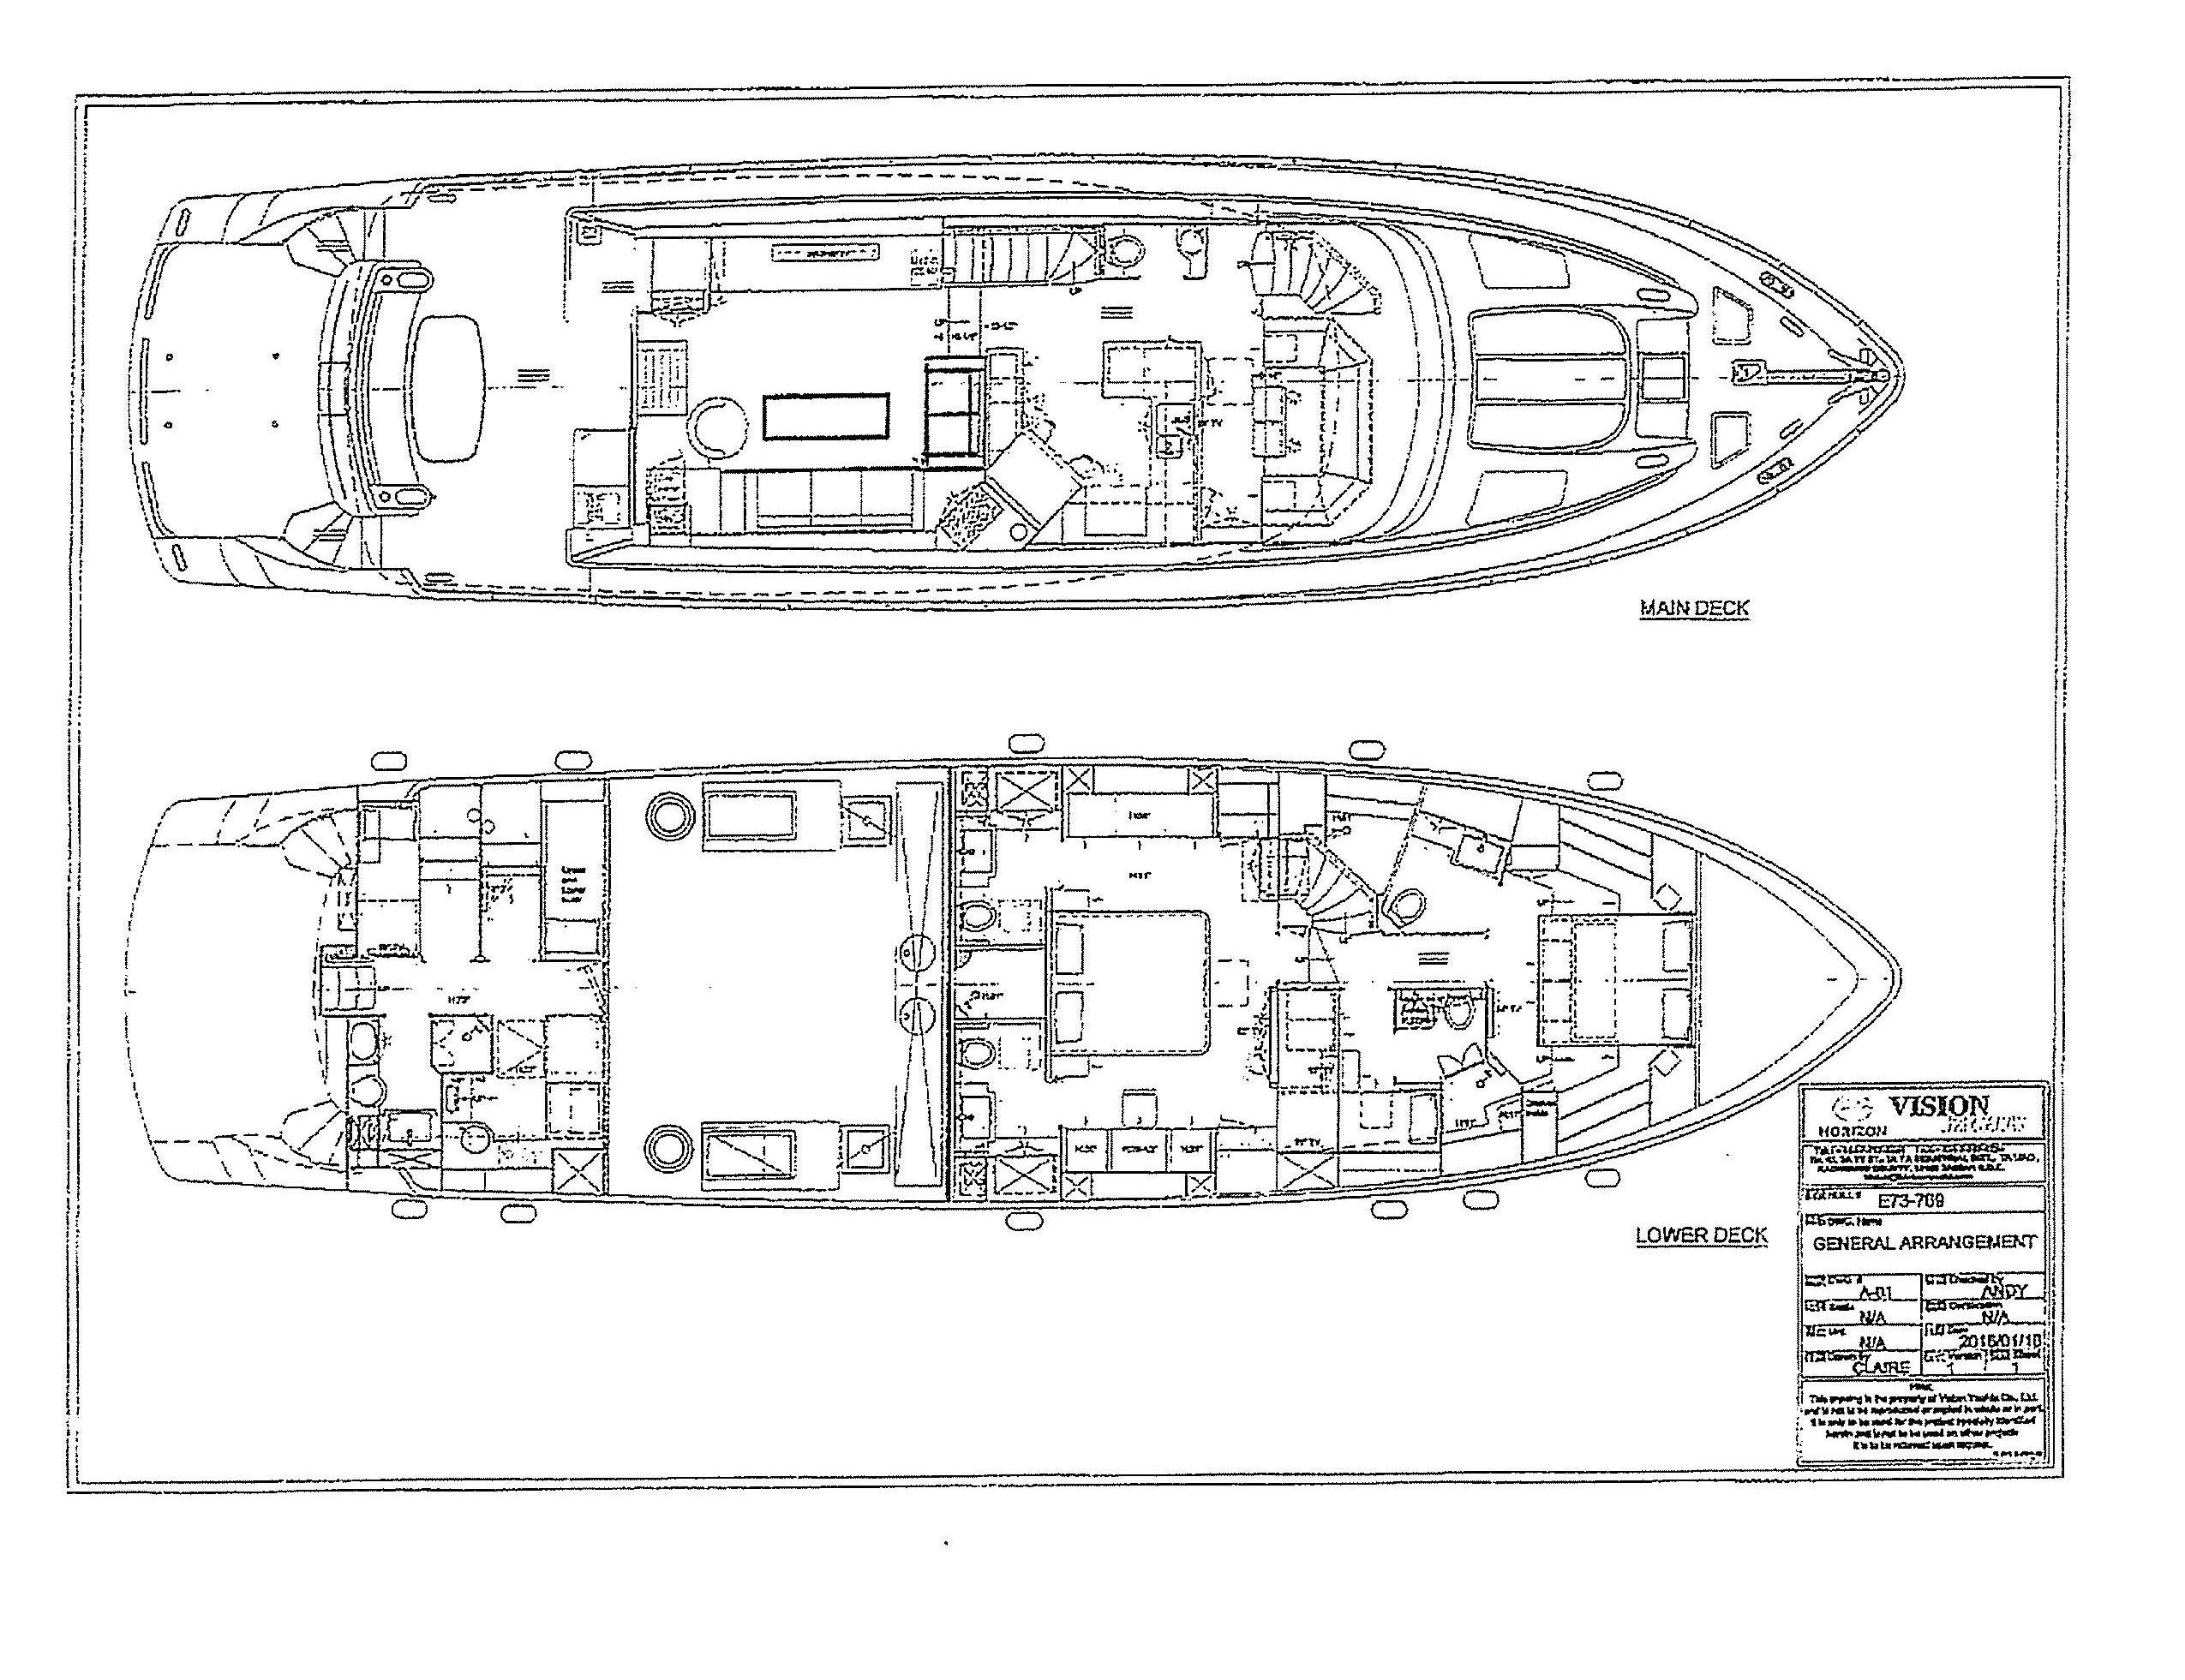 Main Deck and Lower Deck